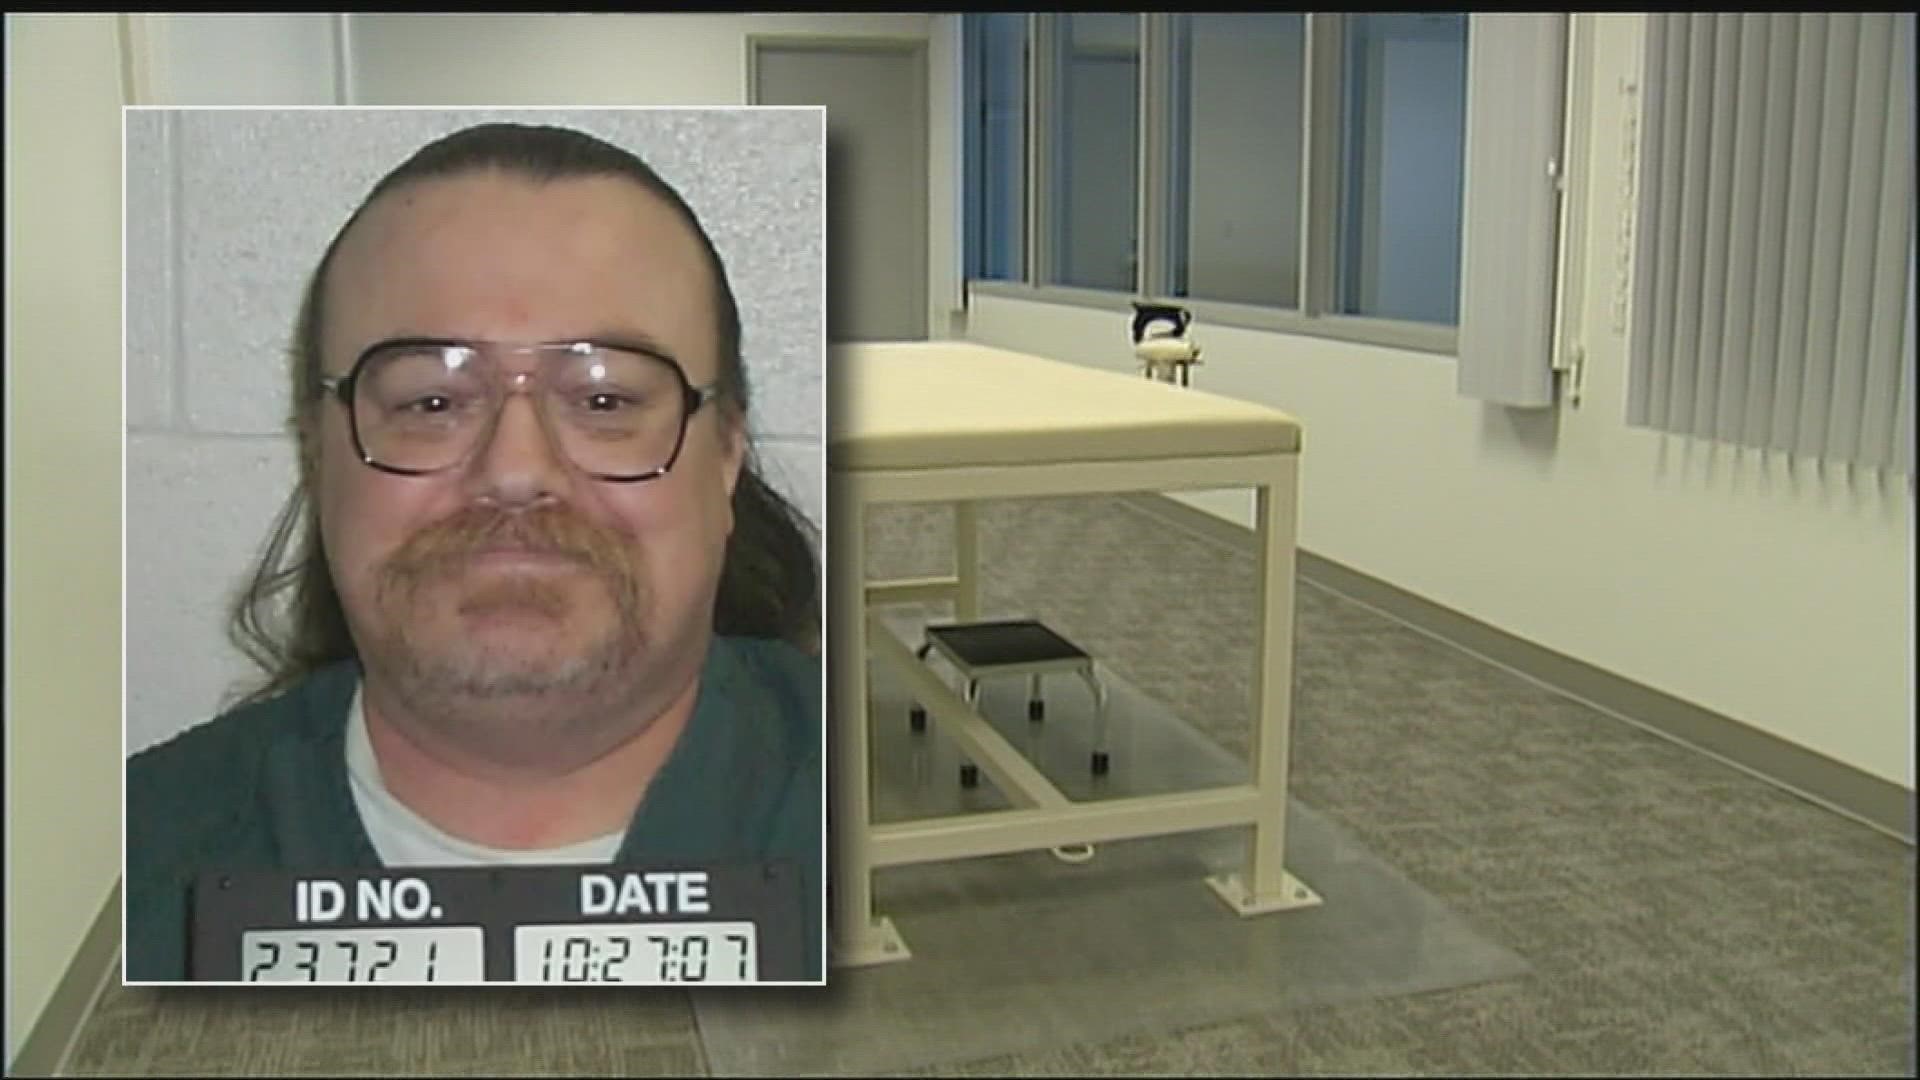 The warrant sets Gerald Pizzuto’s execution by lethal injection on Dec. 15. However, officials are trying to obtain the chemicals needed to carry out the execution.